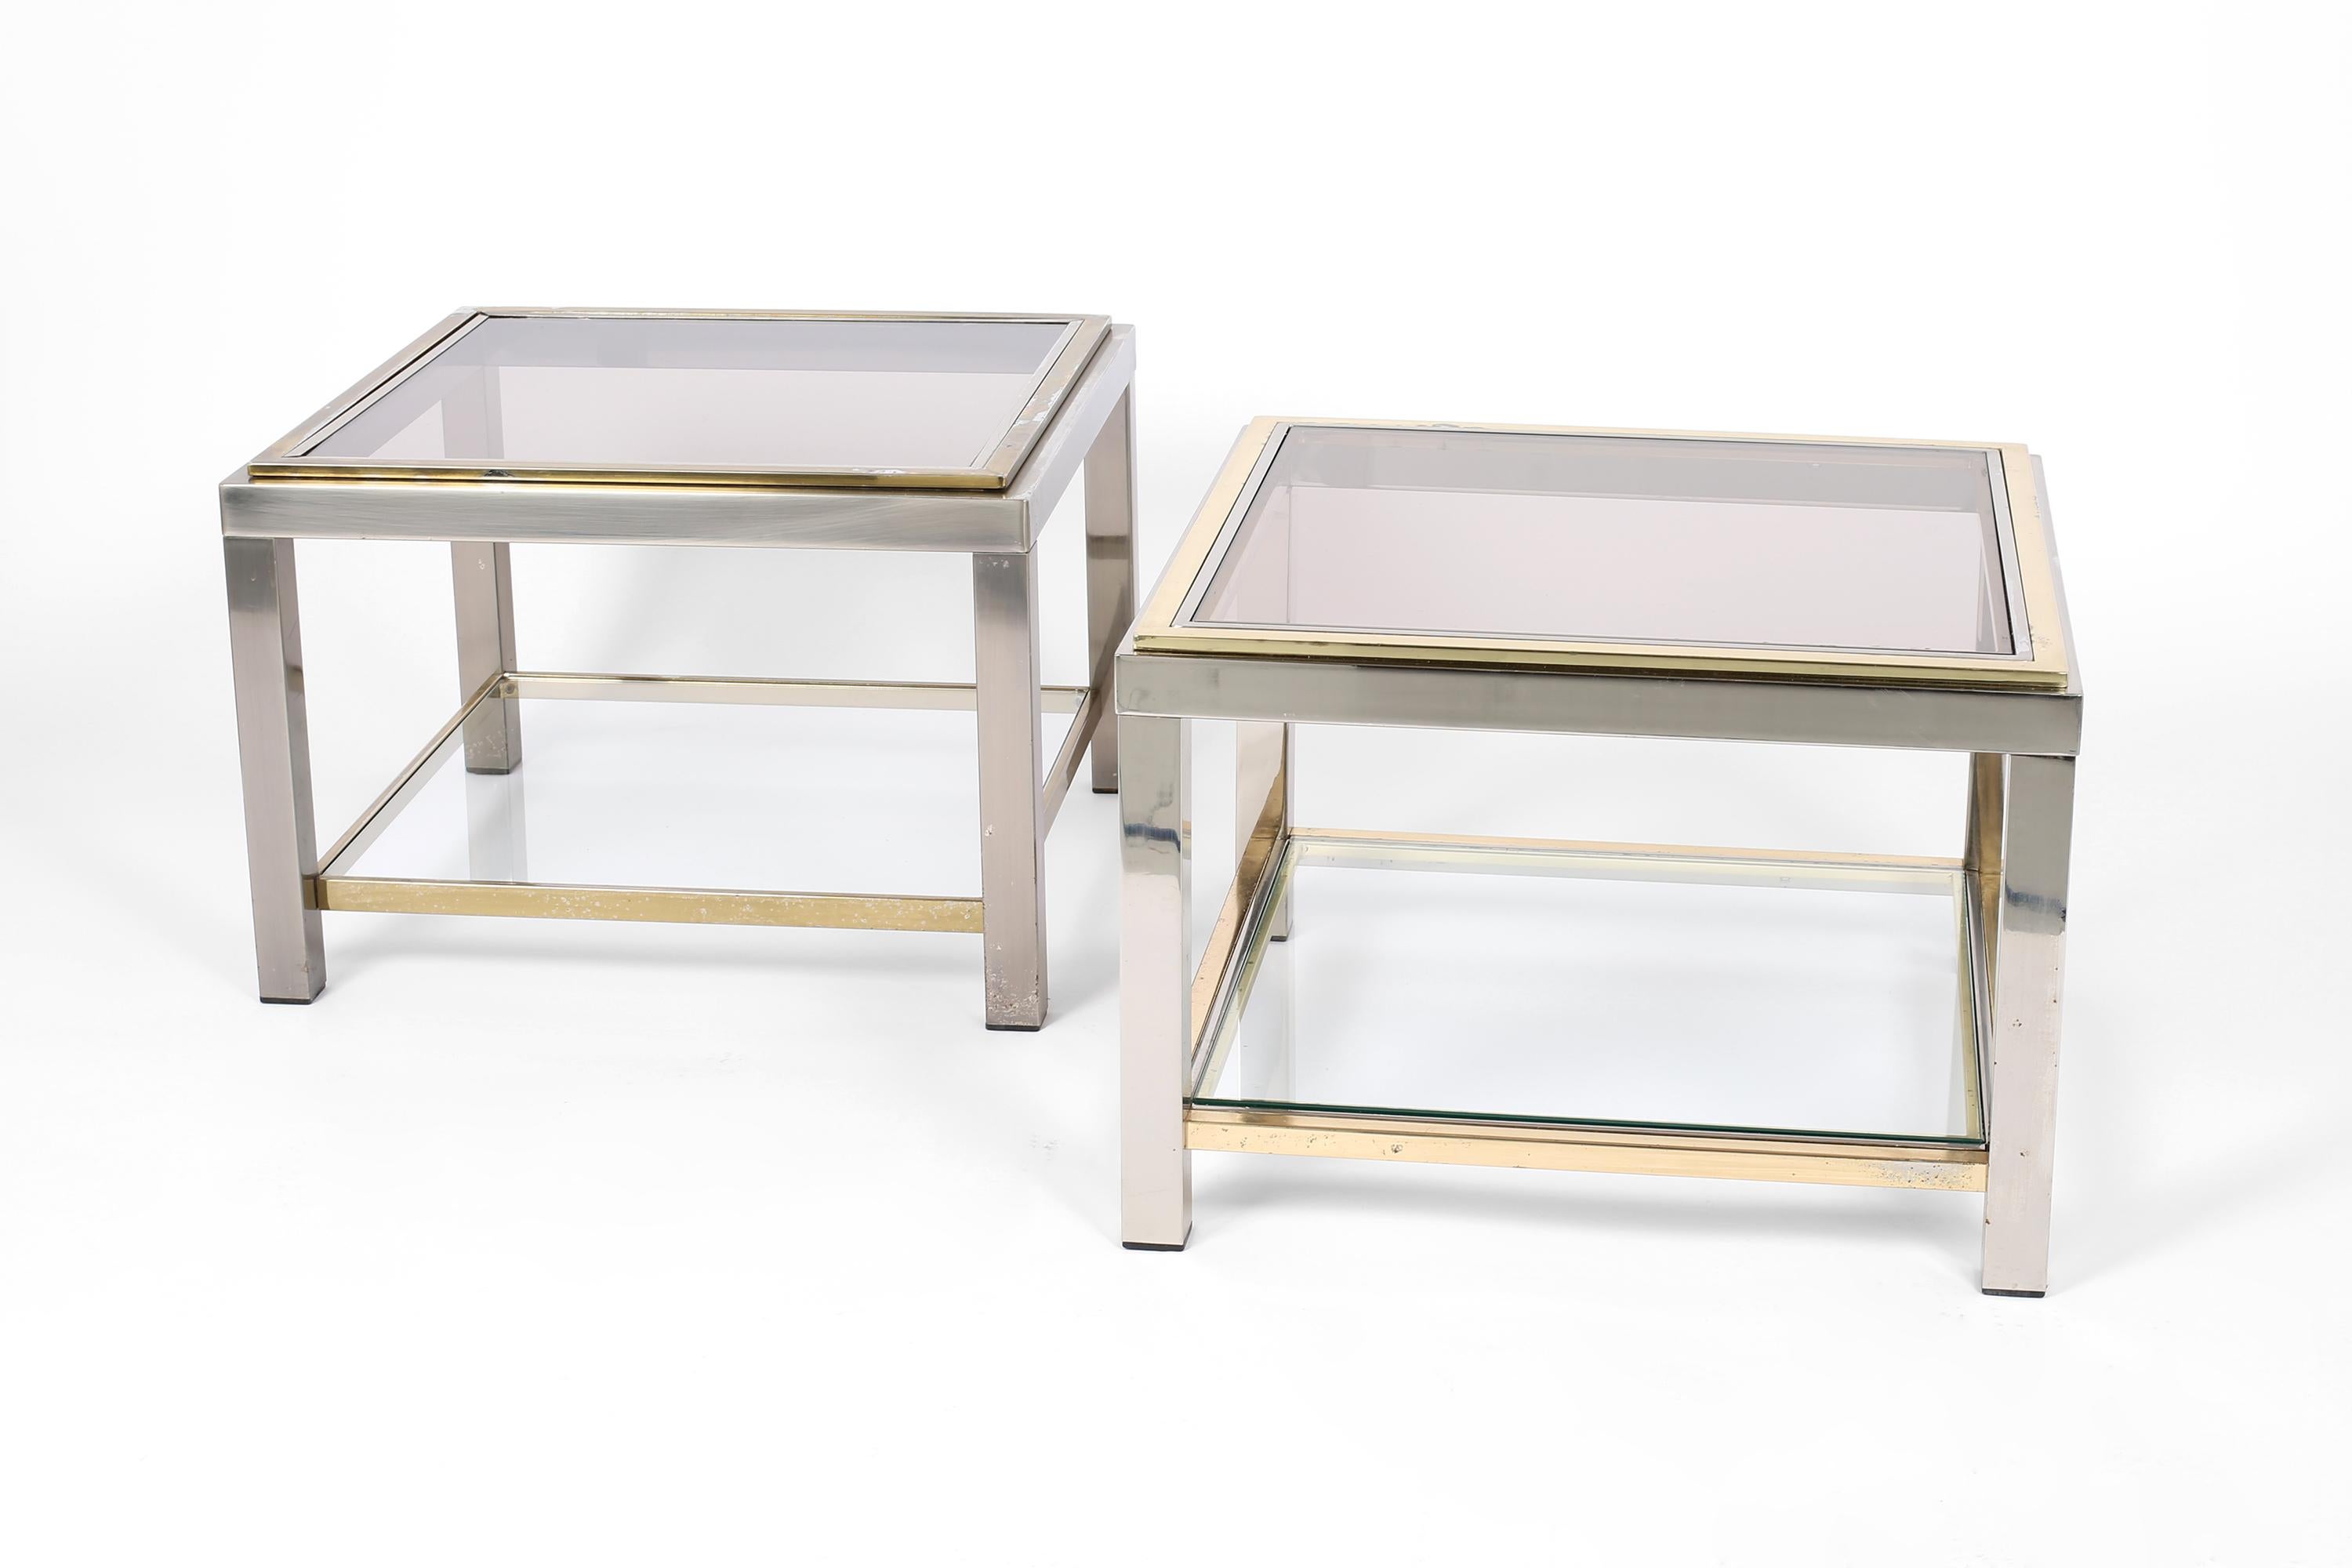 A near pair of side tables in polished and gilt steel, with smoked glass tops and a useful clear glass lower tier. In the manner of Jean Charles or Guy Lefevre. French, c. 1970s.